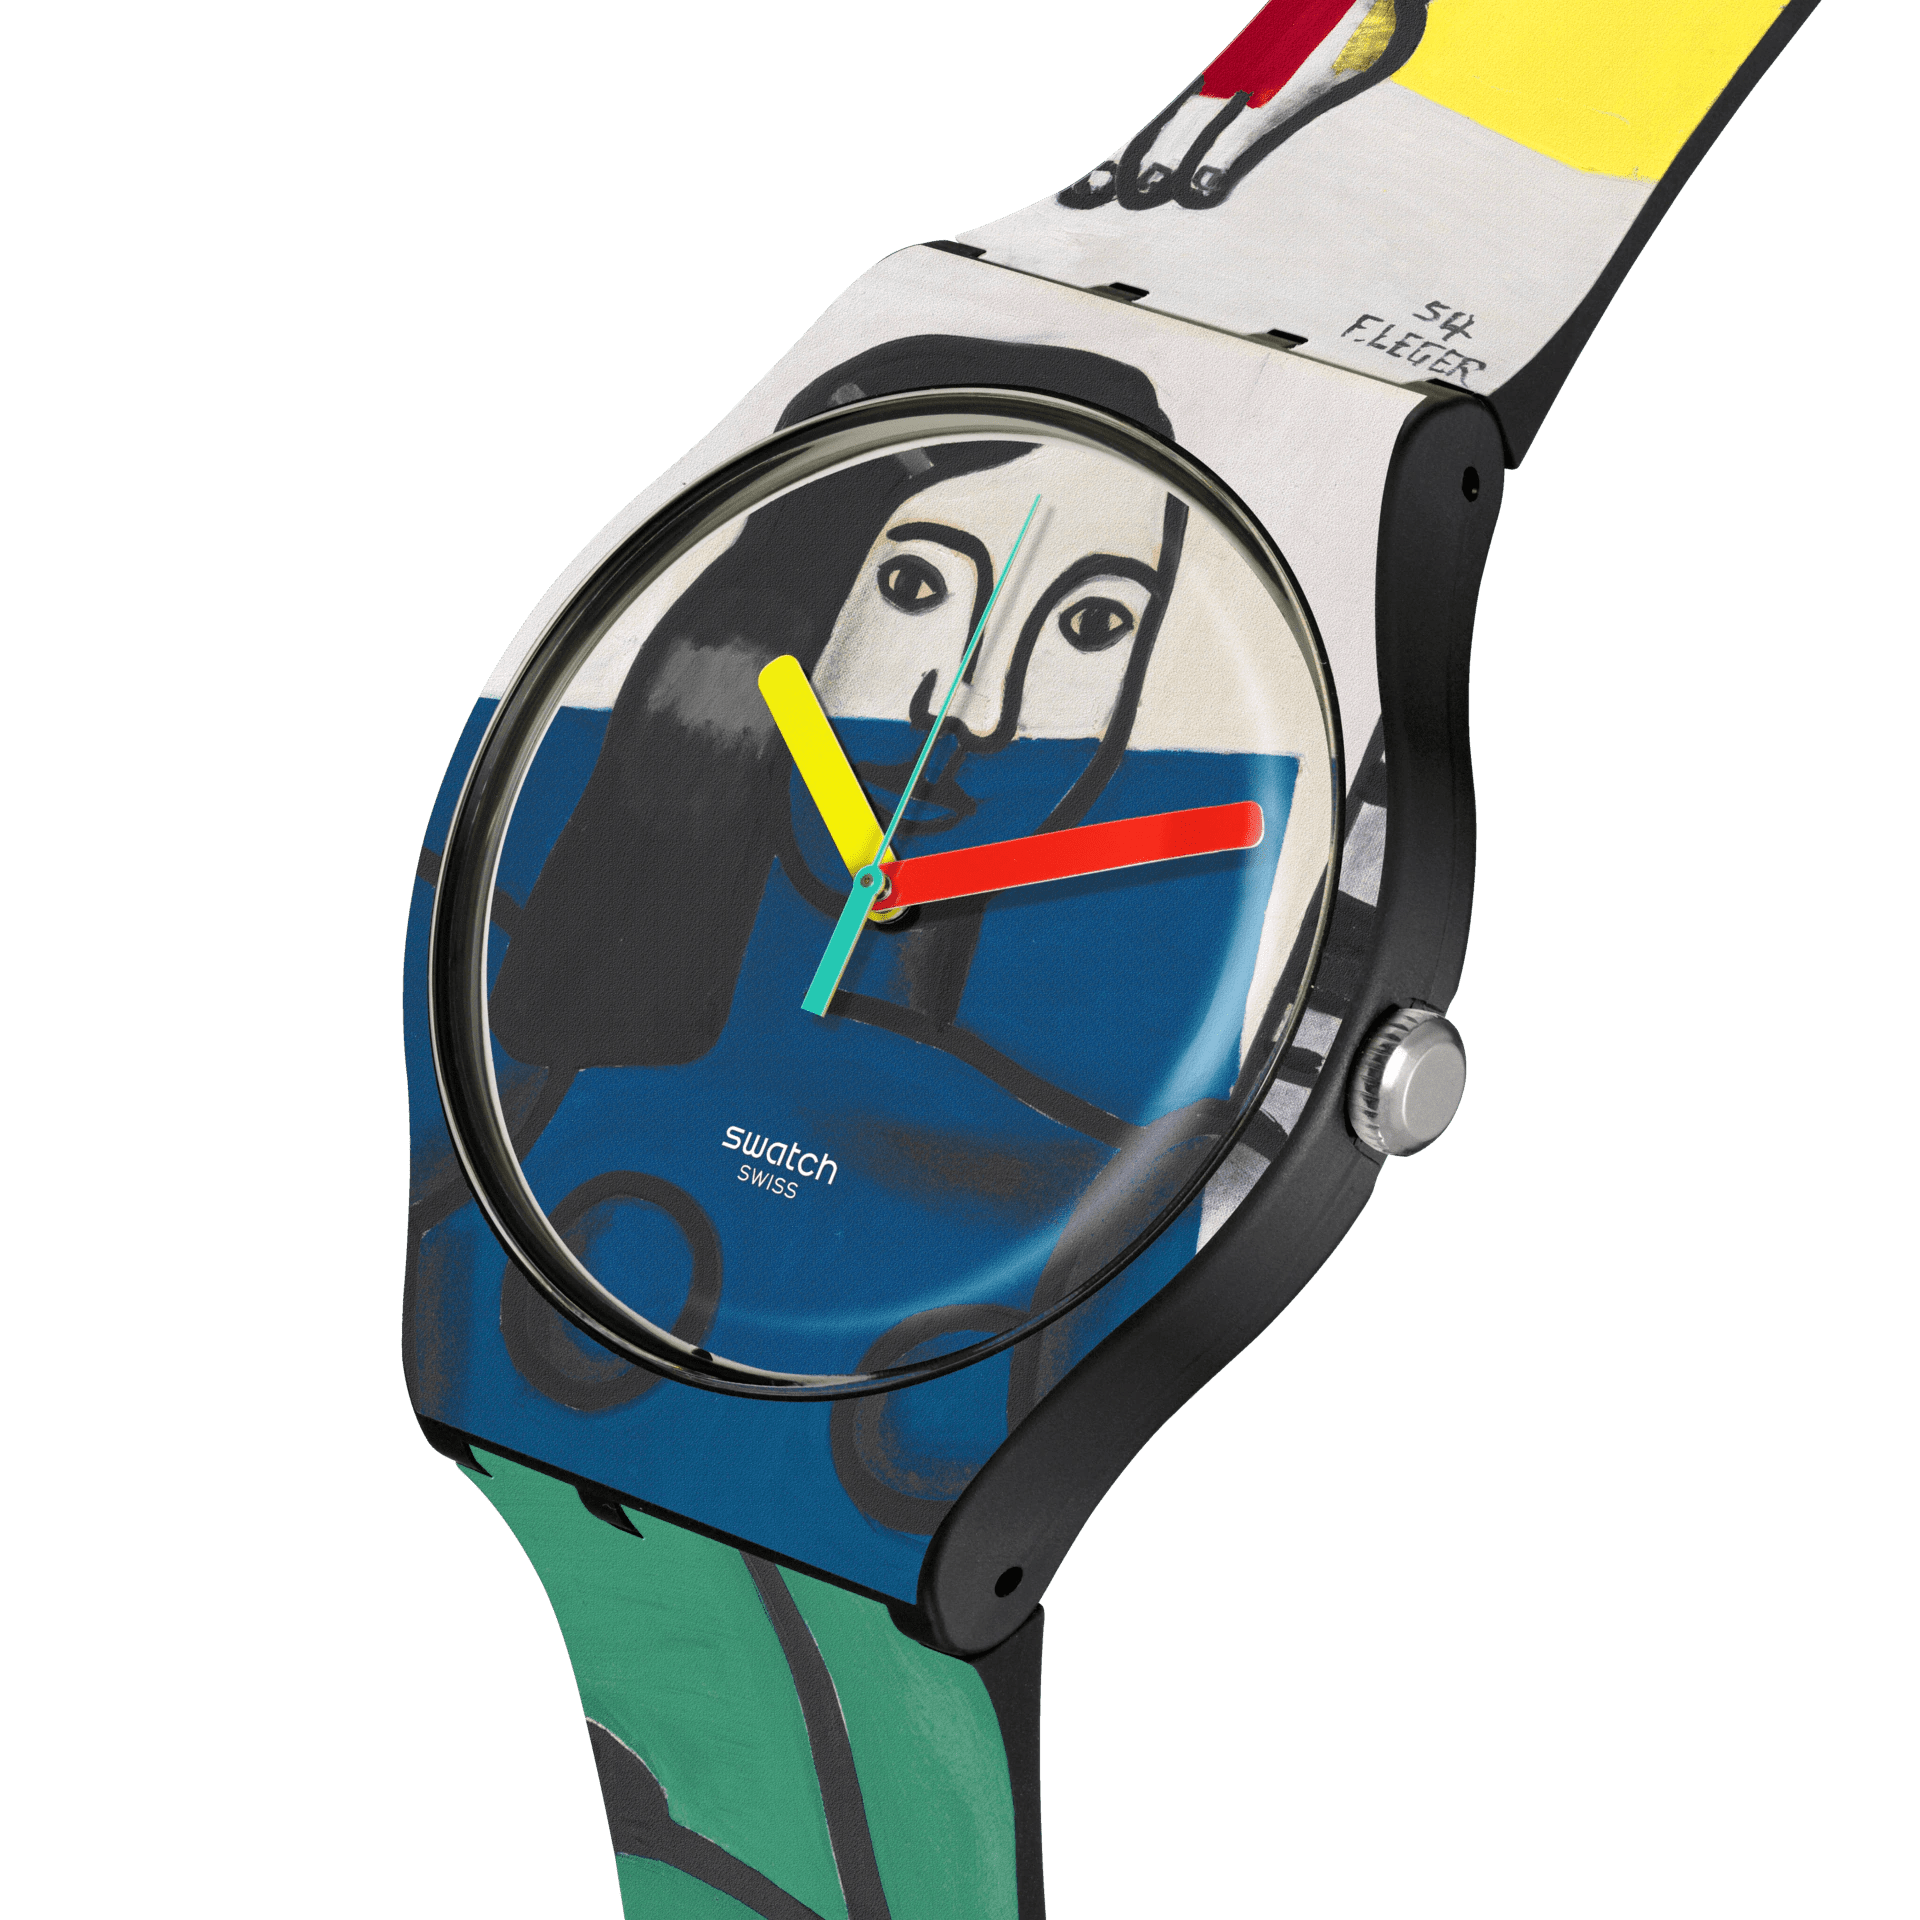 SWATCH X TATE GALLERY LEGER'S TWO WOMEN HOLDING FLOWERS - SUOZ363 - Simmi Gioiellerie -Orologi